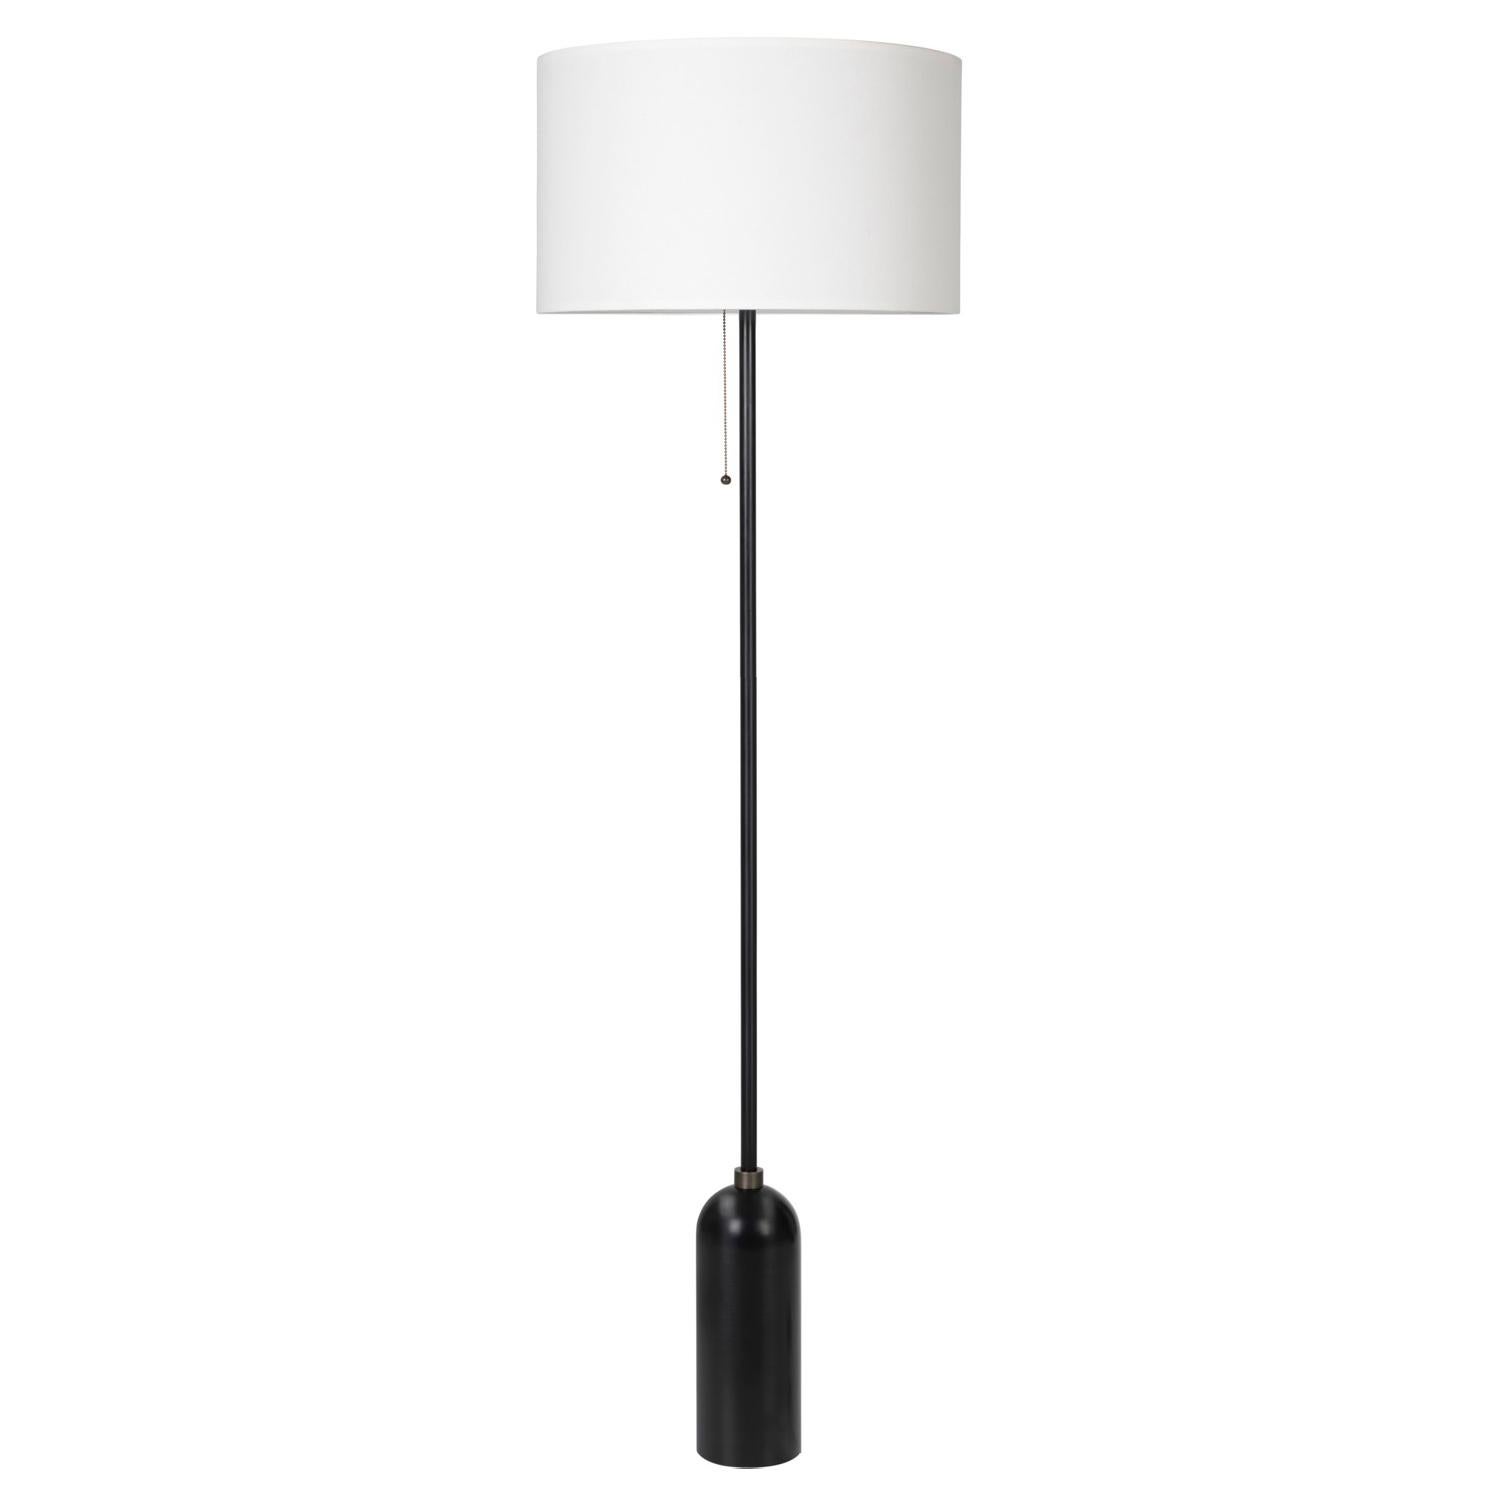 'Gravity' Blackened Steel Floor Lamp for Gubi with Canvas Shade In New Condition For Sale In Glendale, CA